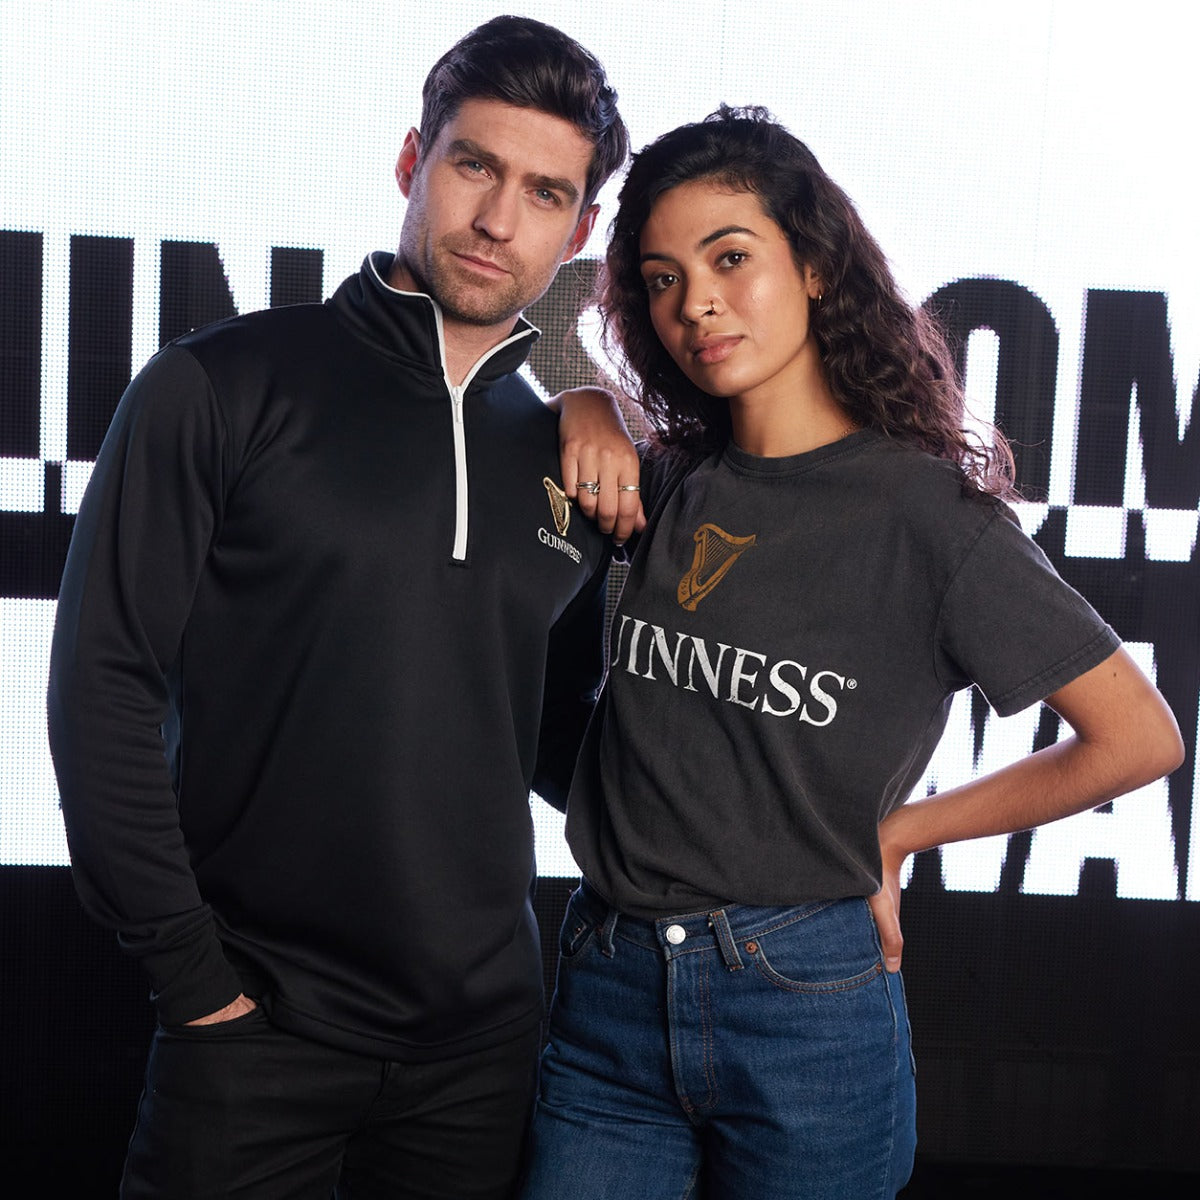 A man and woman, both Guinness fans, posing in front of a Guinness Harp Half Zip Sweater.